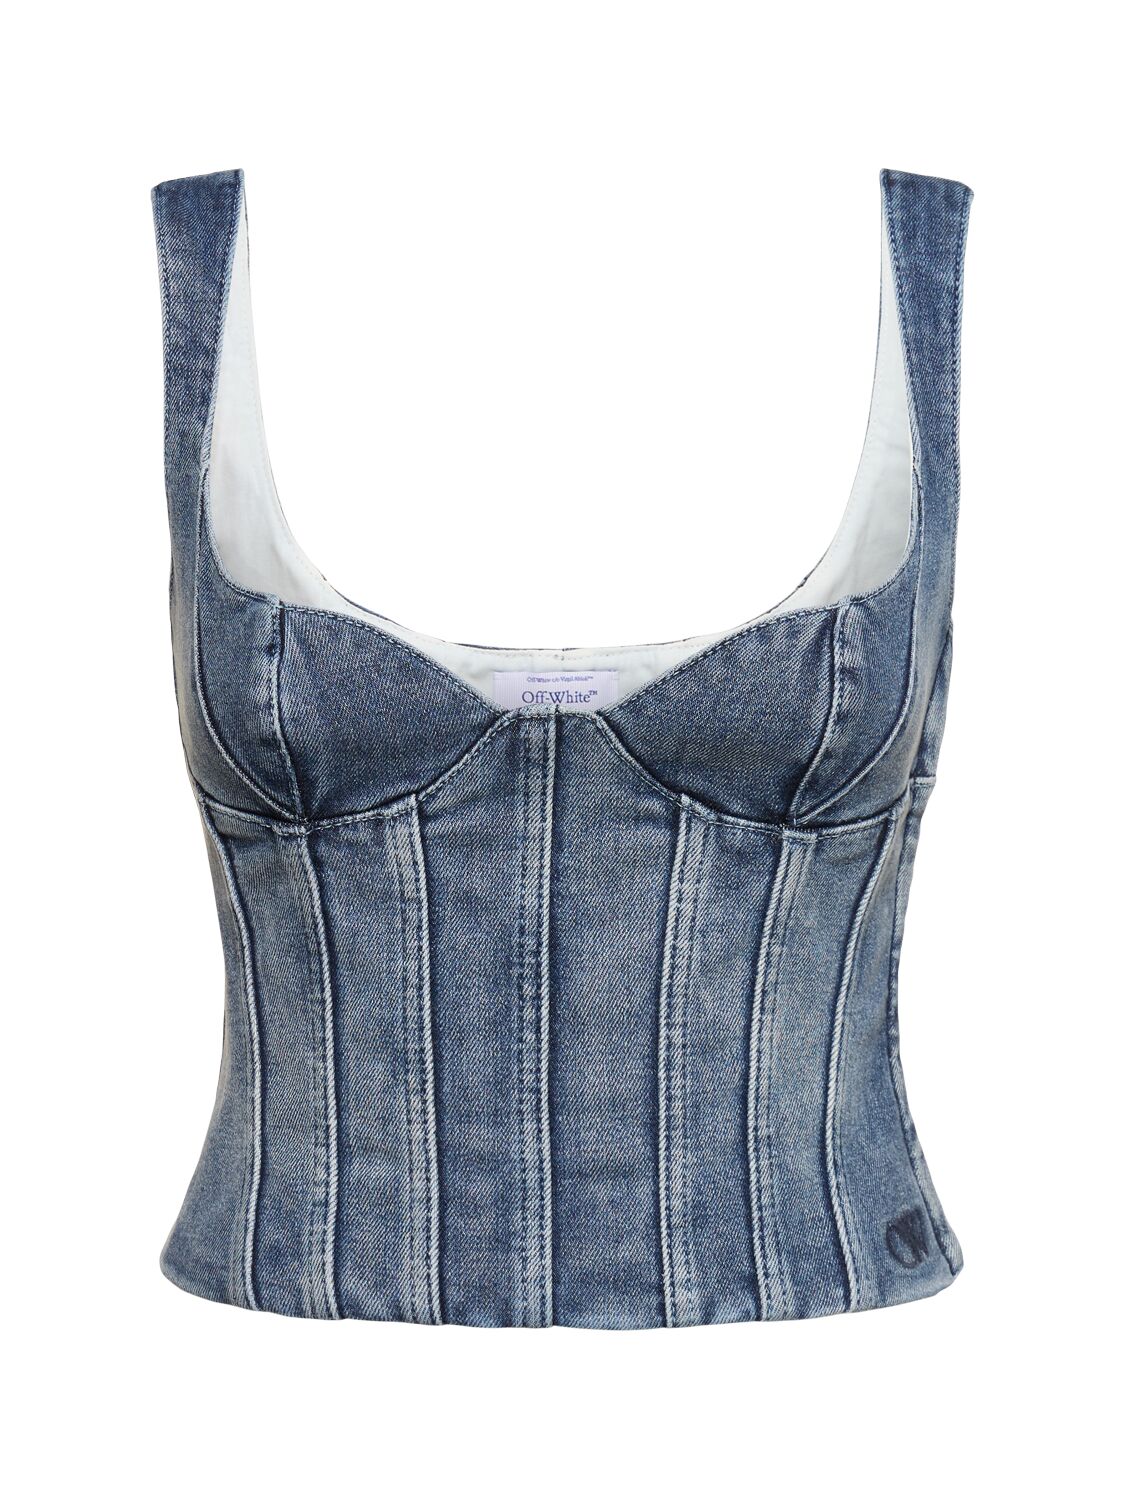 Image of Cotton Bustier Top